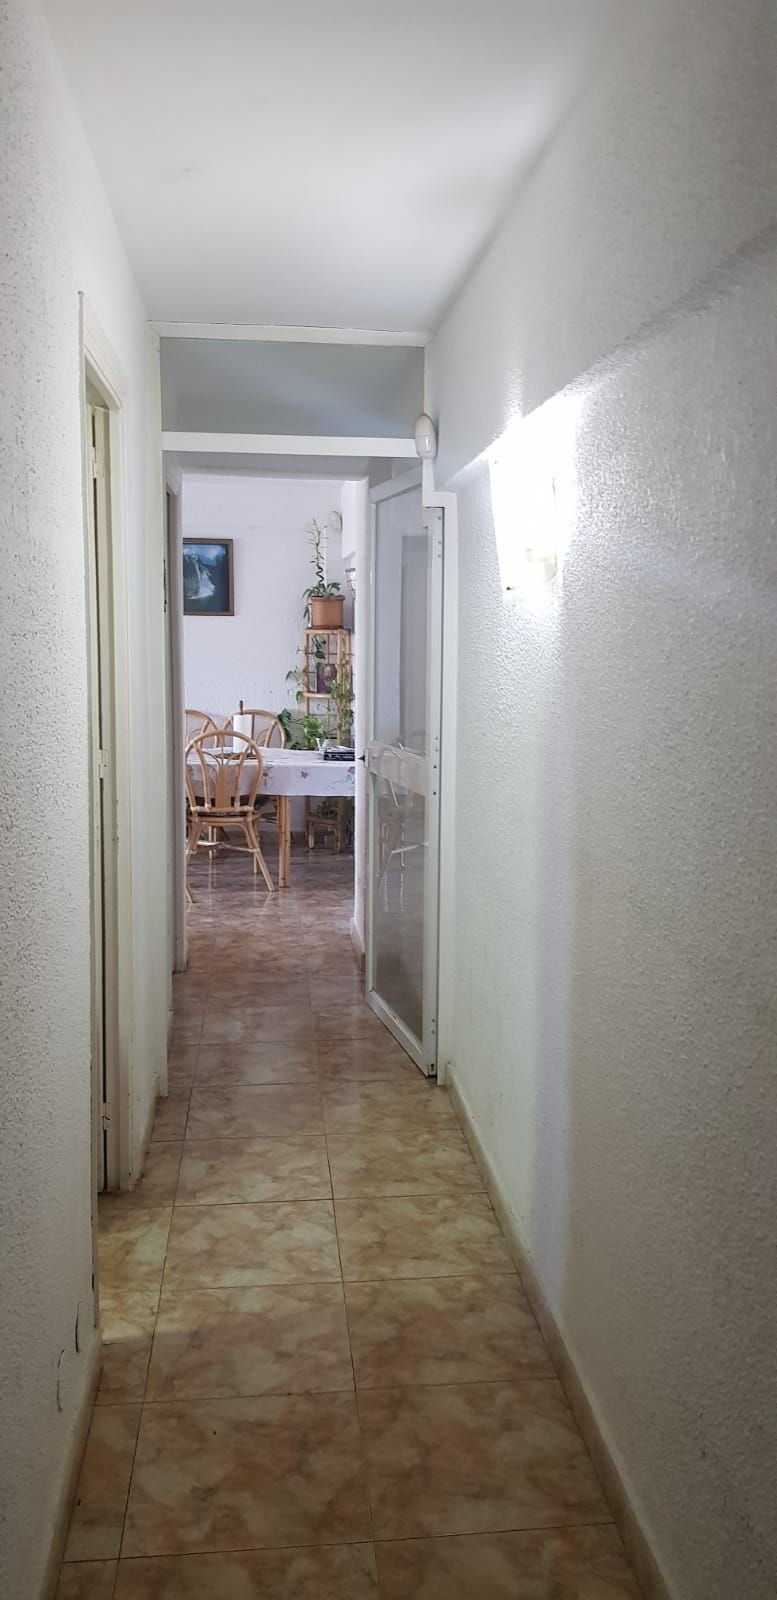 3 bedroom Apartment For Sale in Los Boliches, Málaga - thumb 5